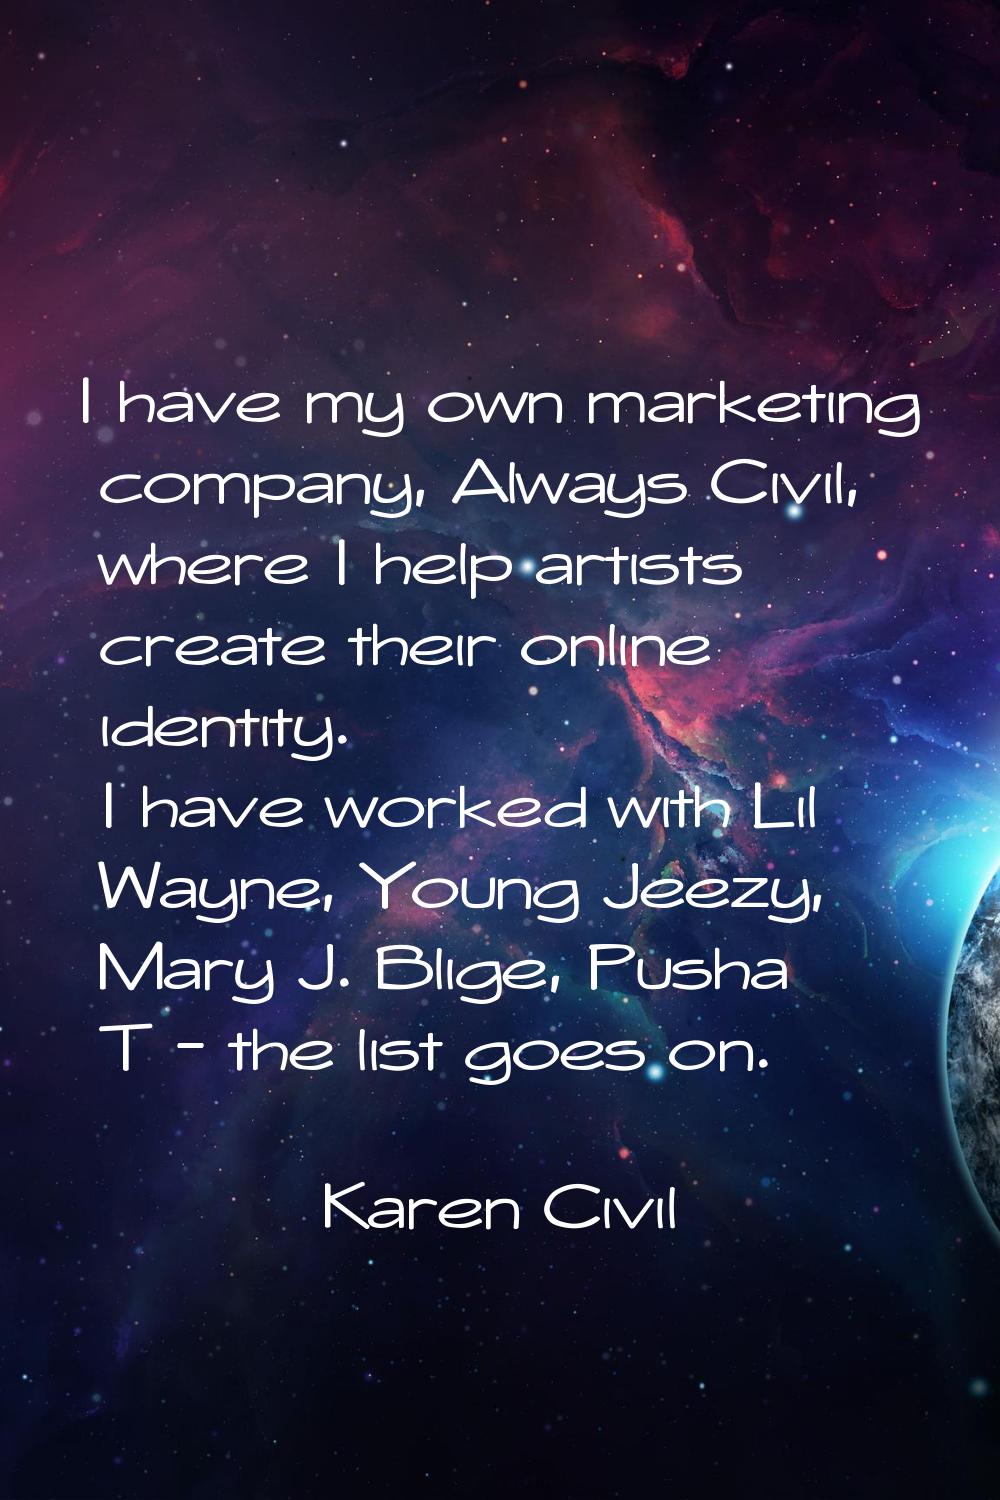 I have my own marketing company, Always Civil, where I help artists create their online identity. I